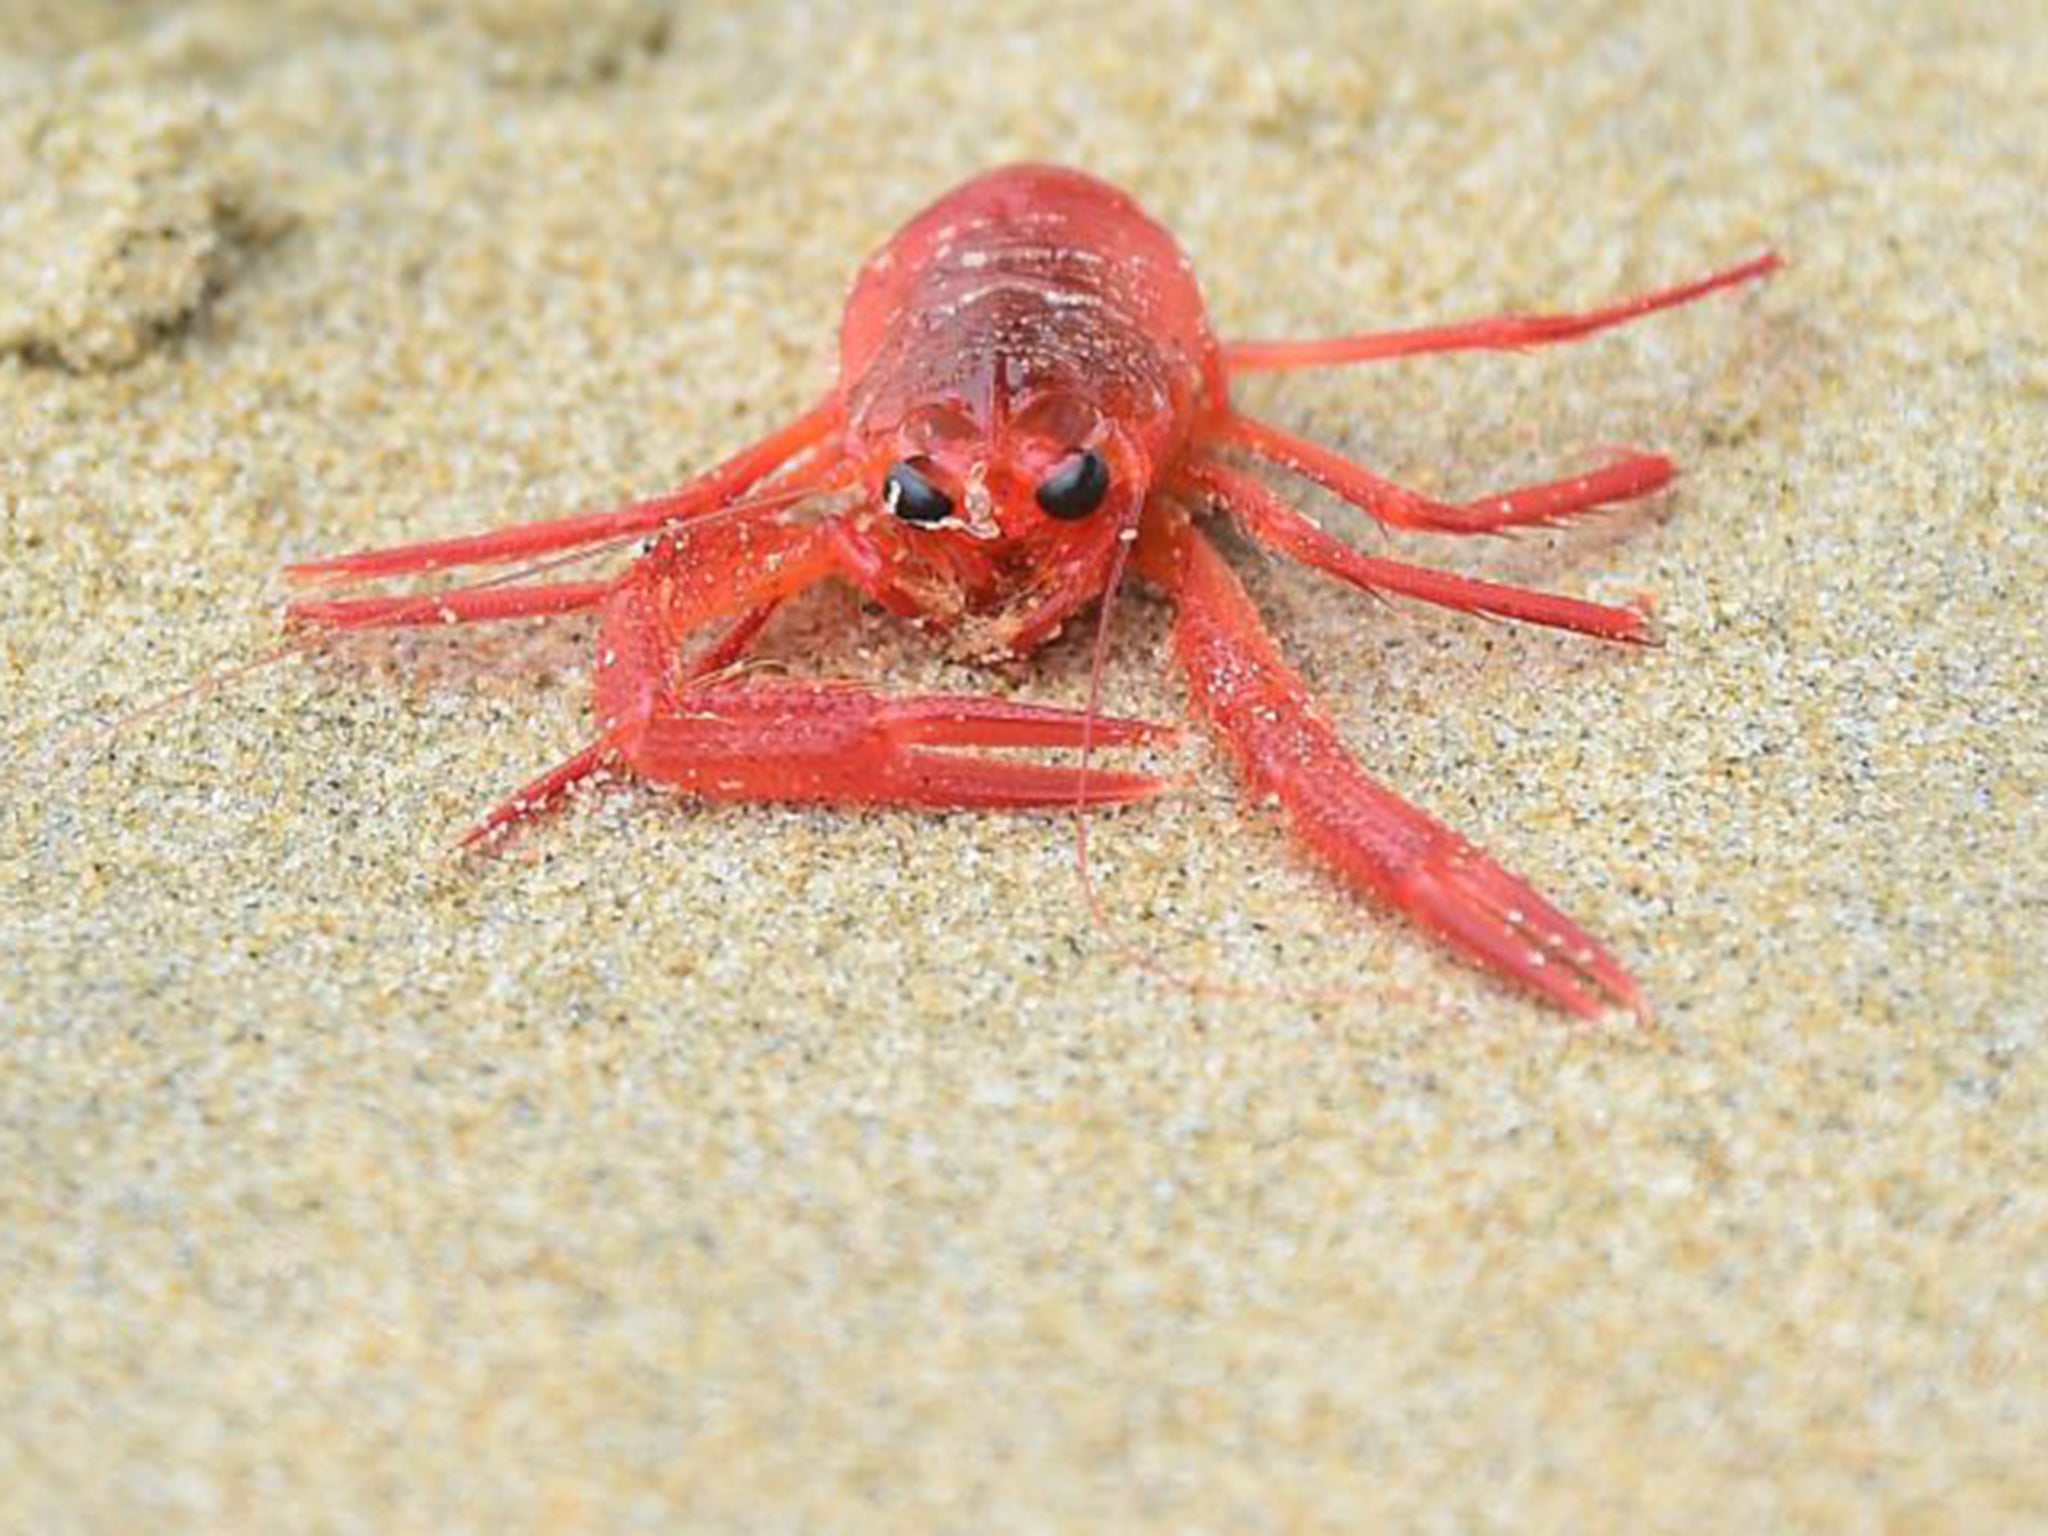 A tiny red crab washed ahore on California’s Newport beach